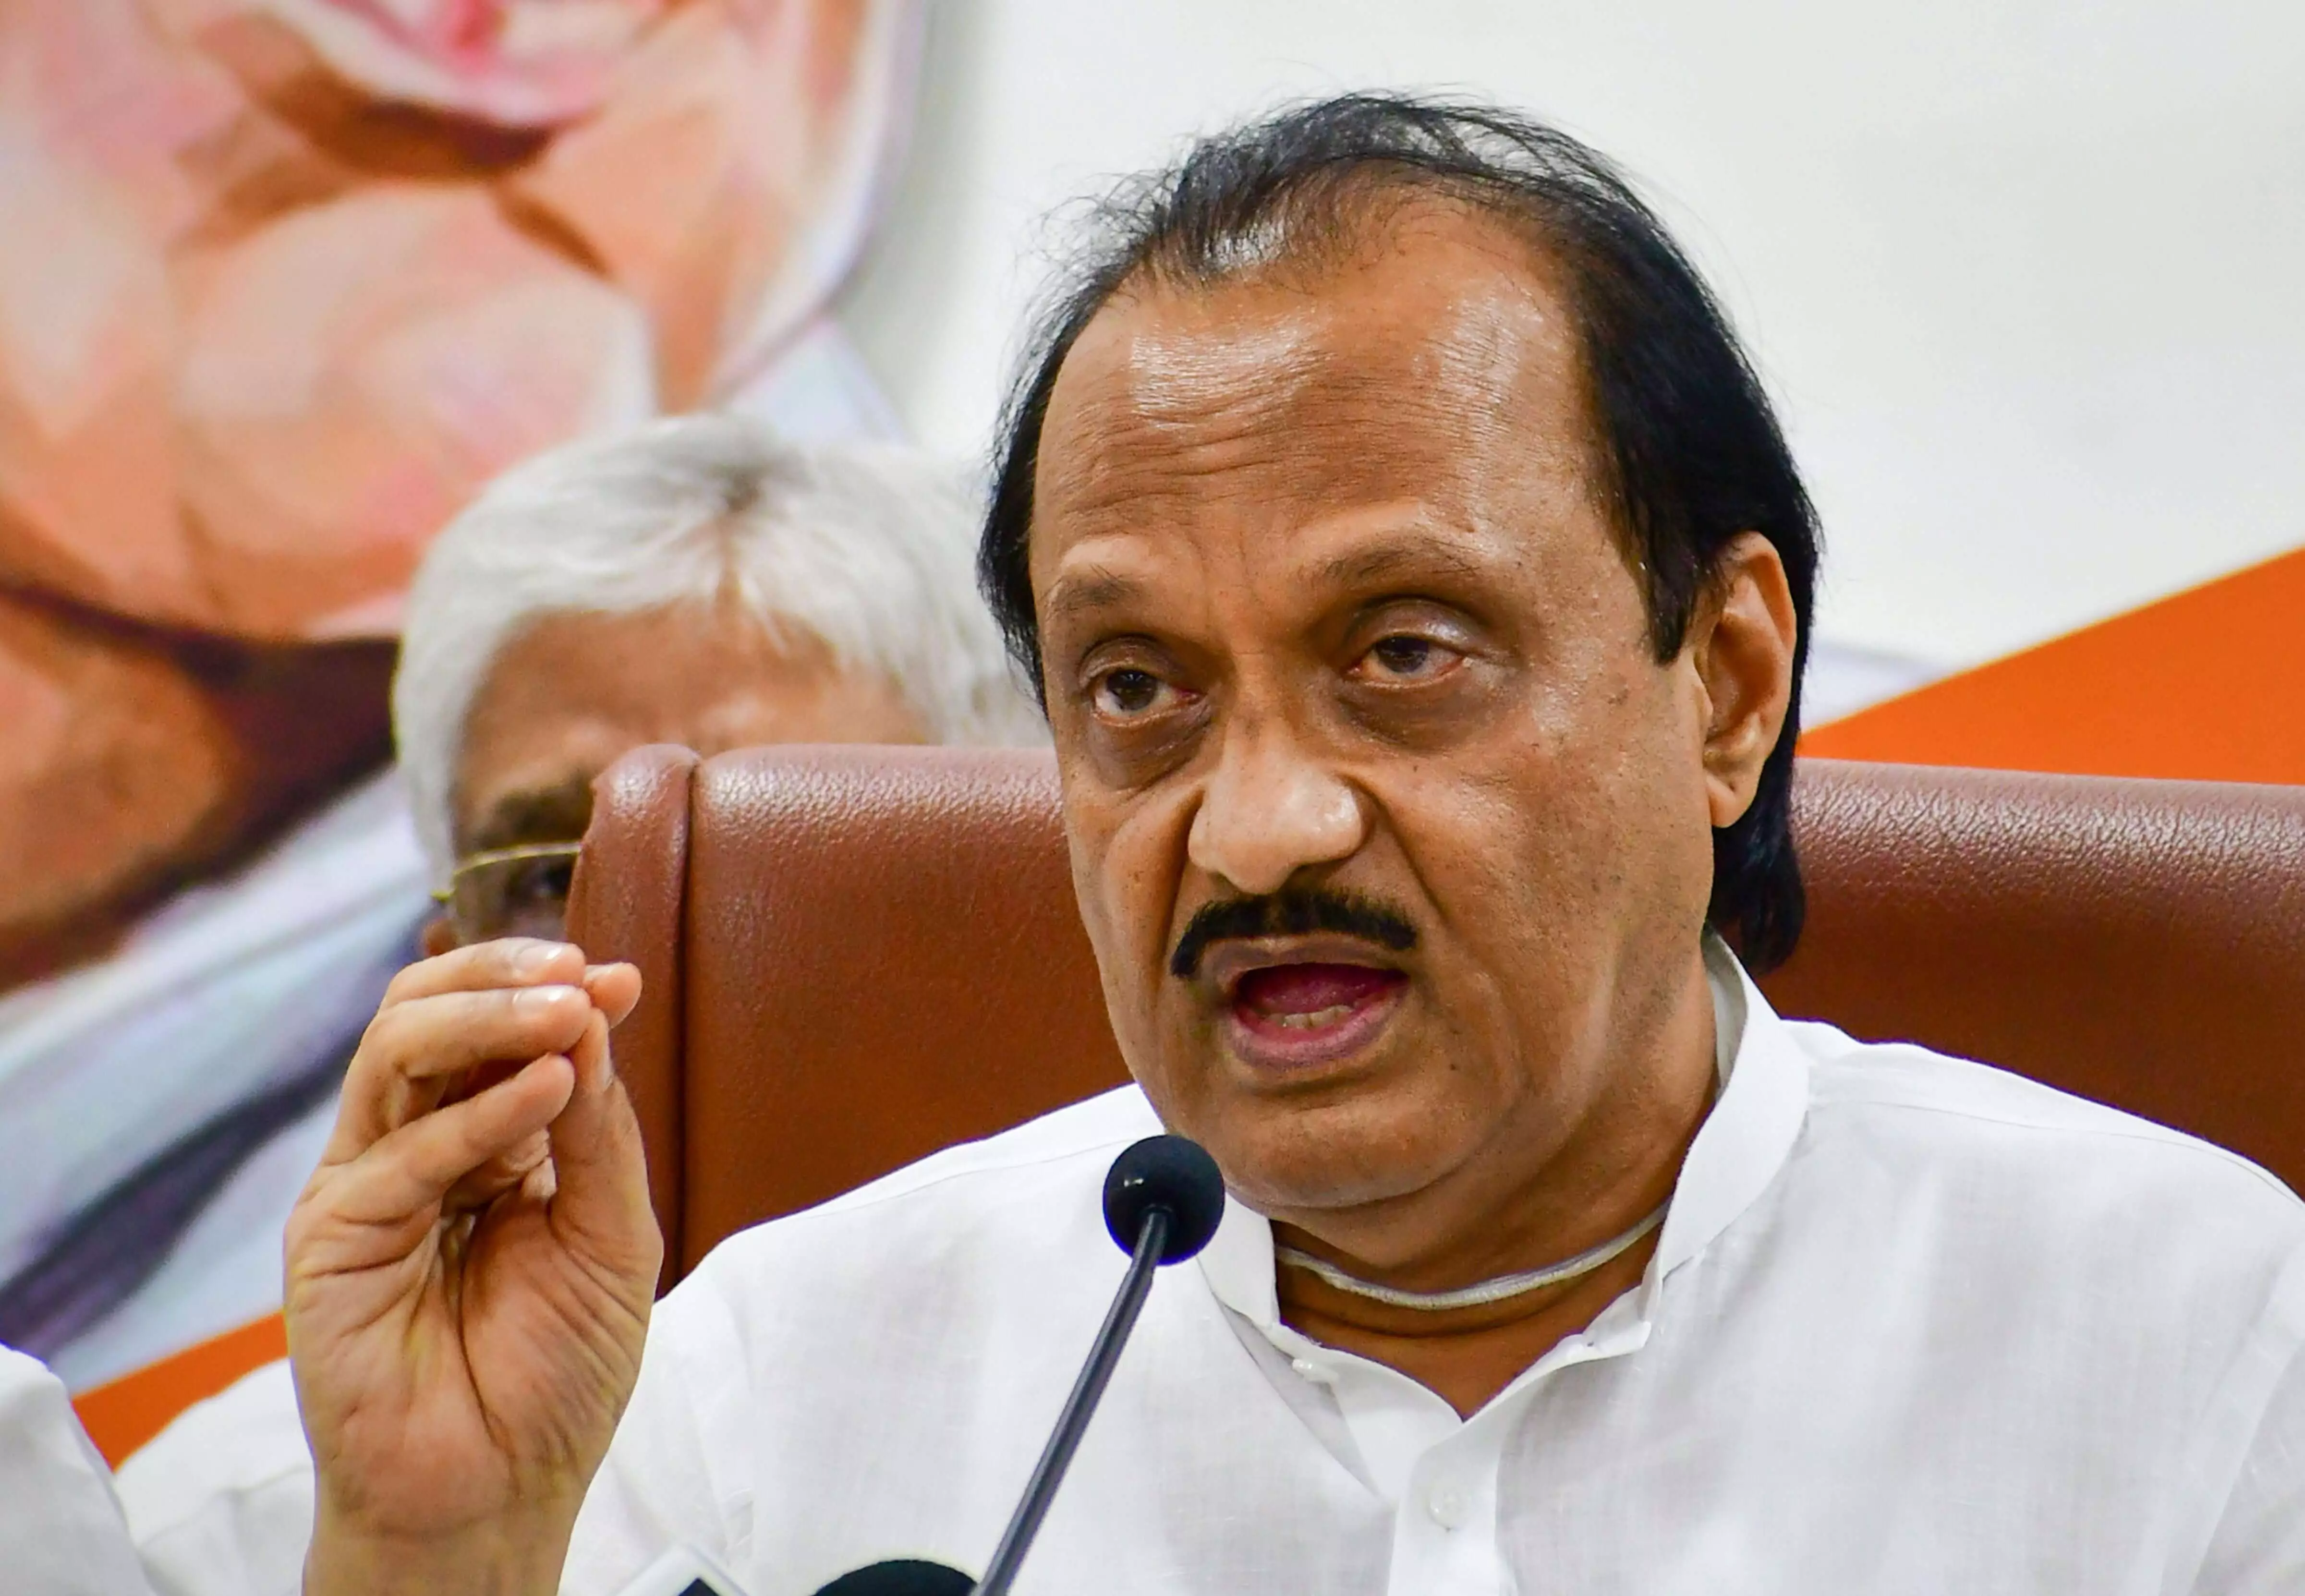 Maharashtra: Ajit Pawar says will reconsider his stand against old pension scheme